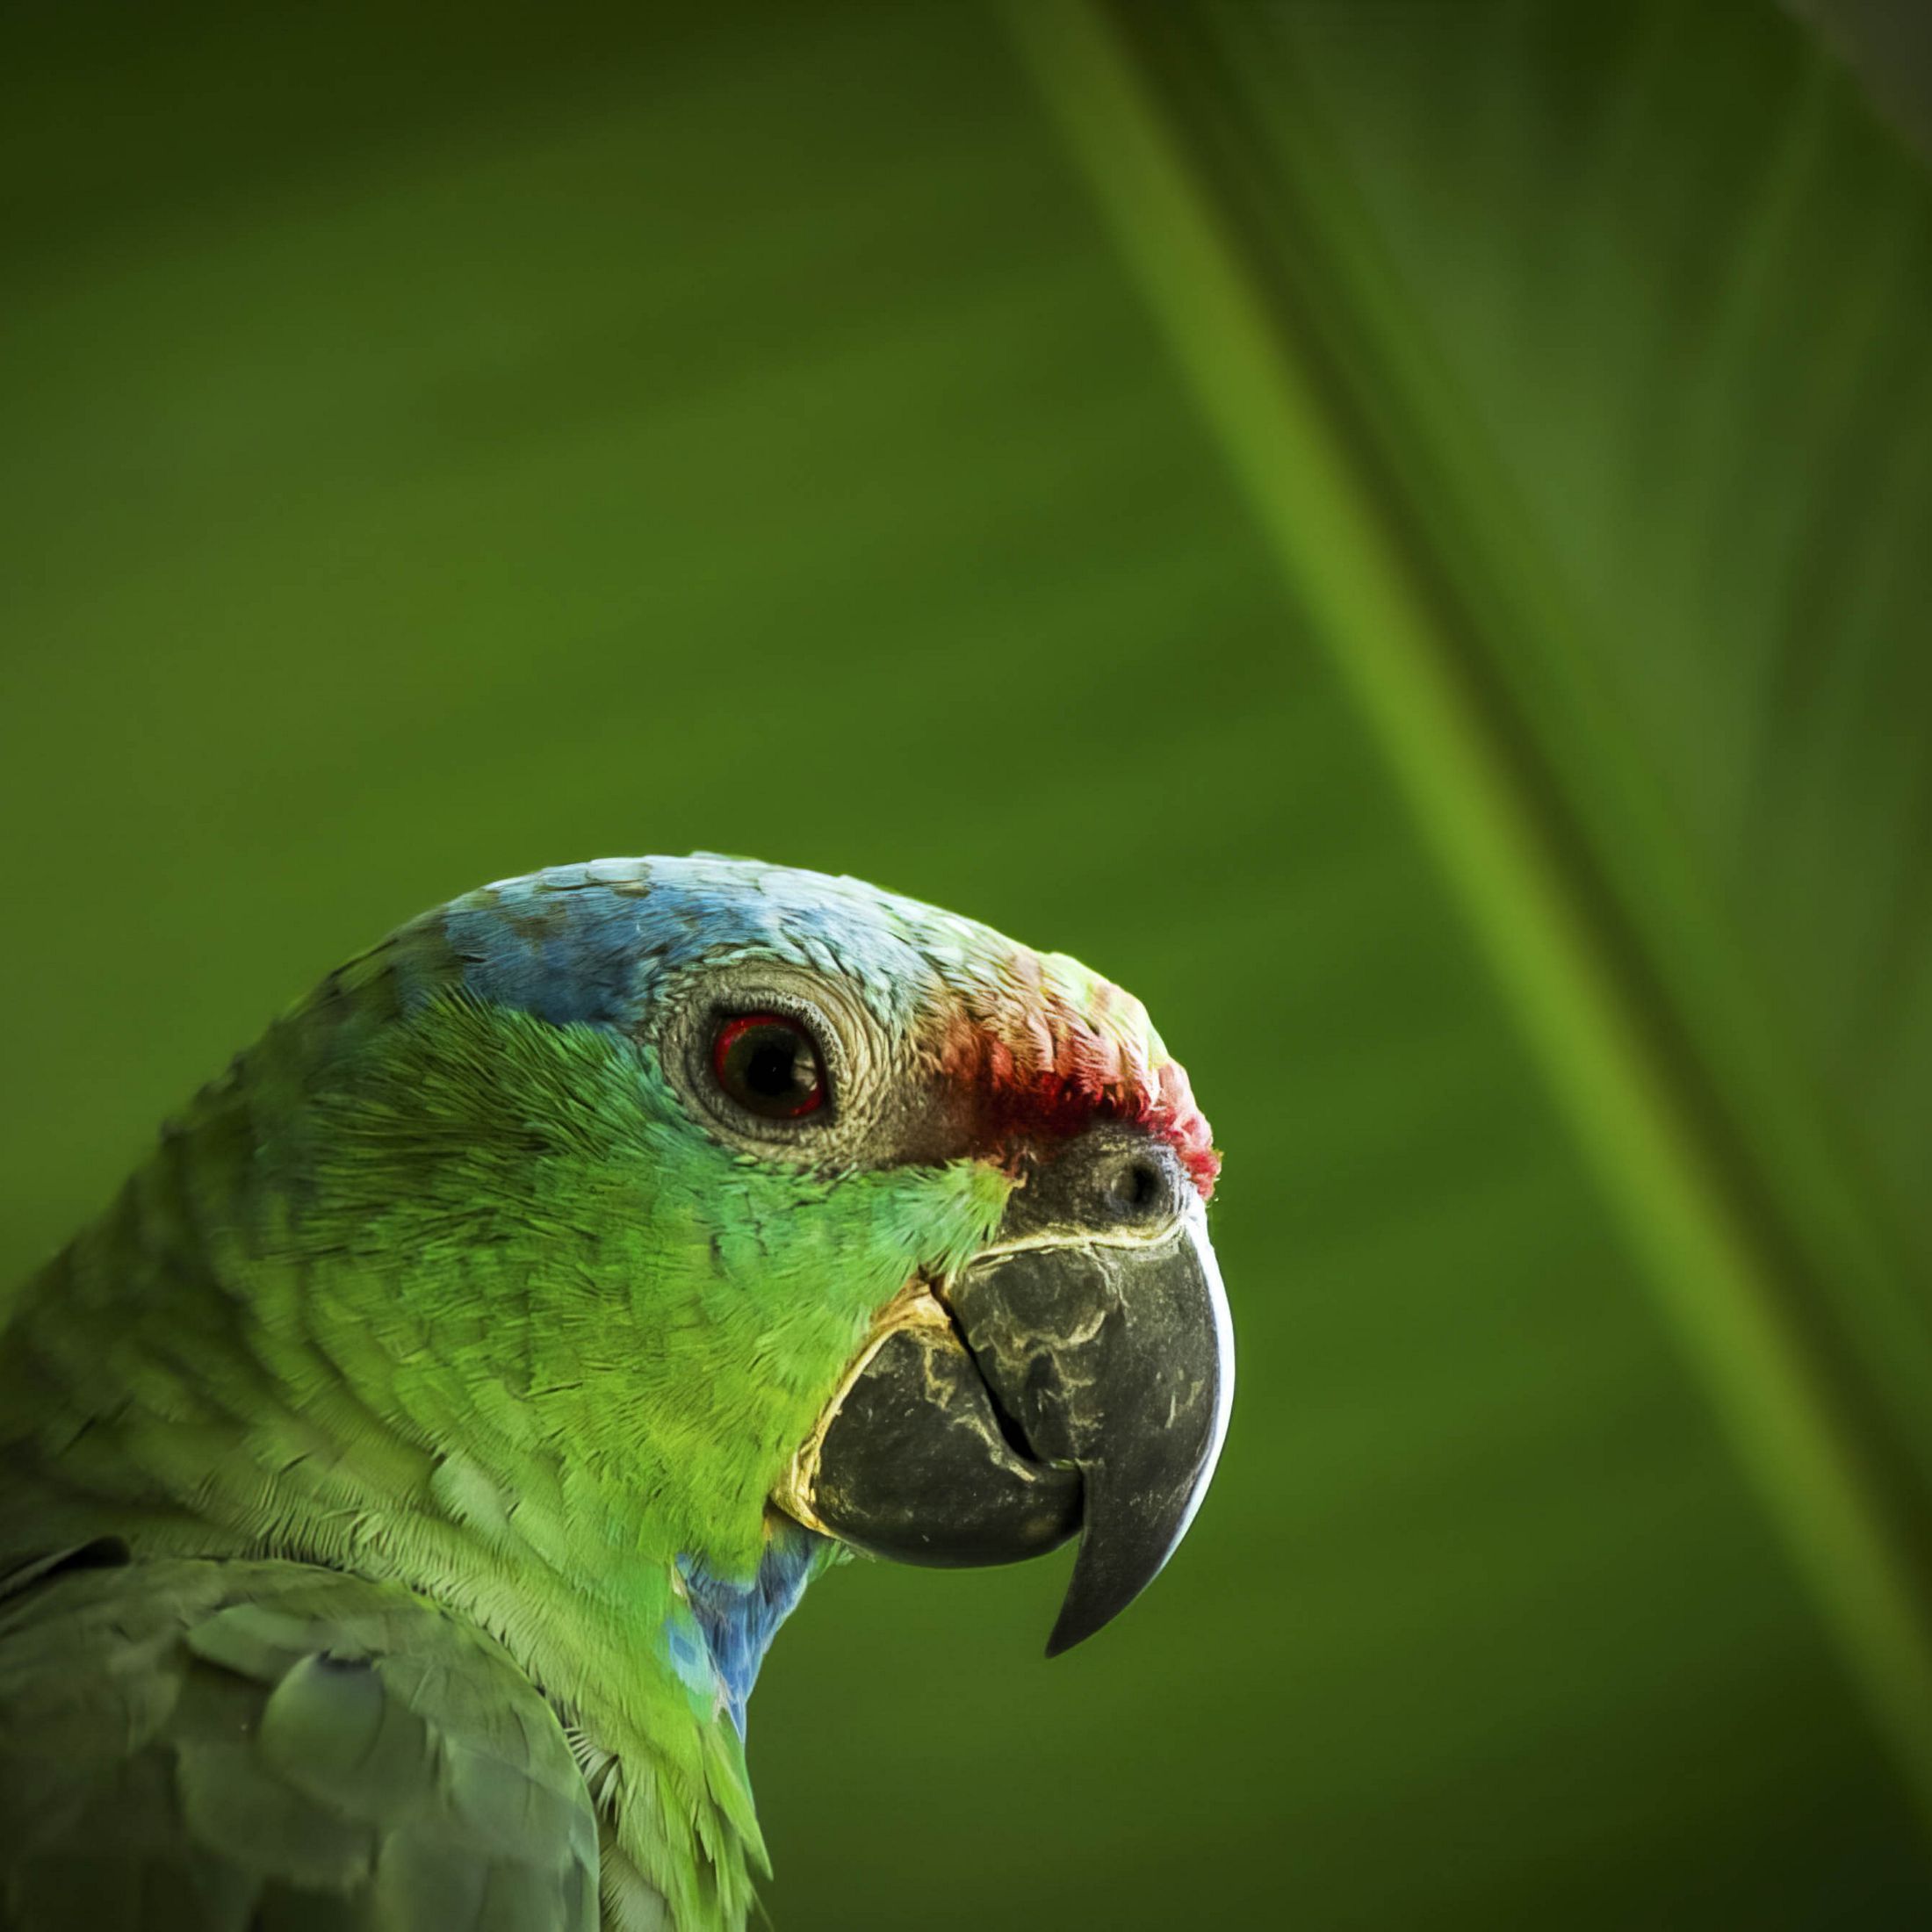 a close up of a red-browed parrot